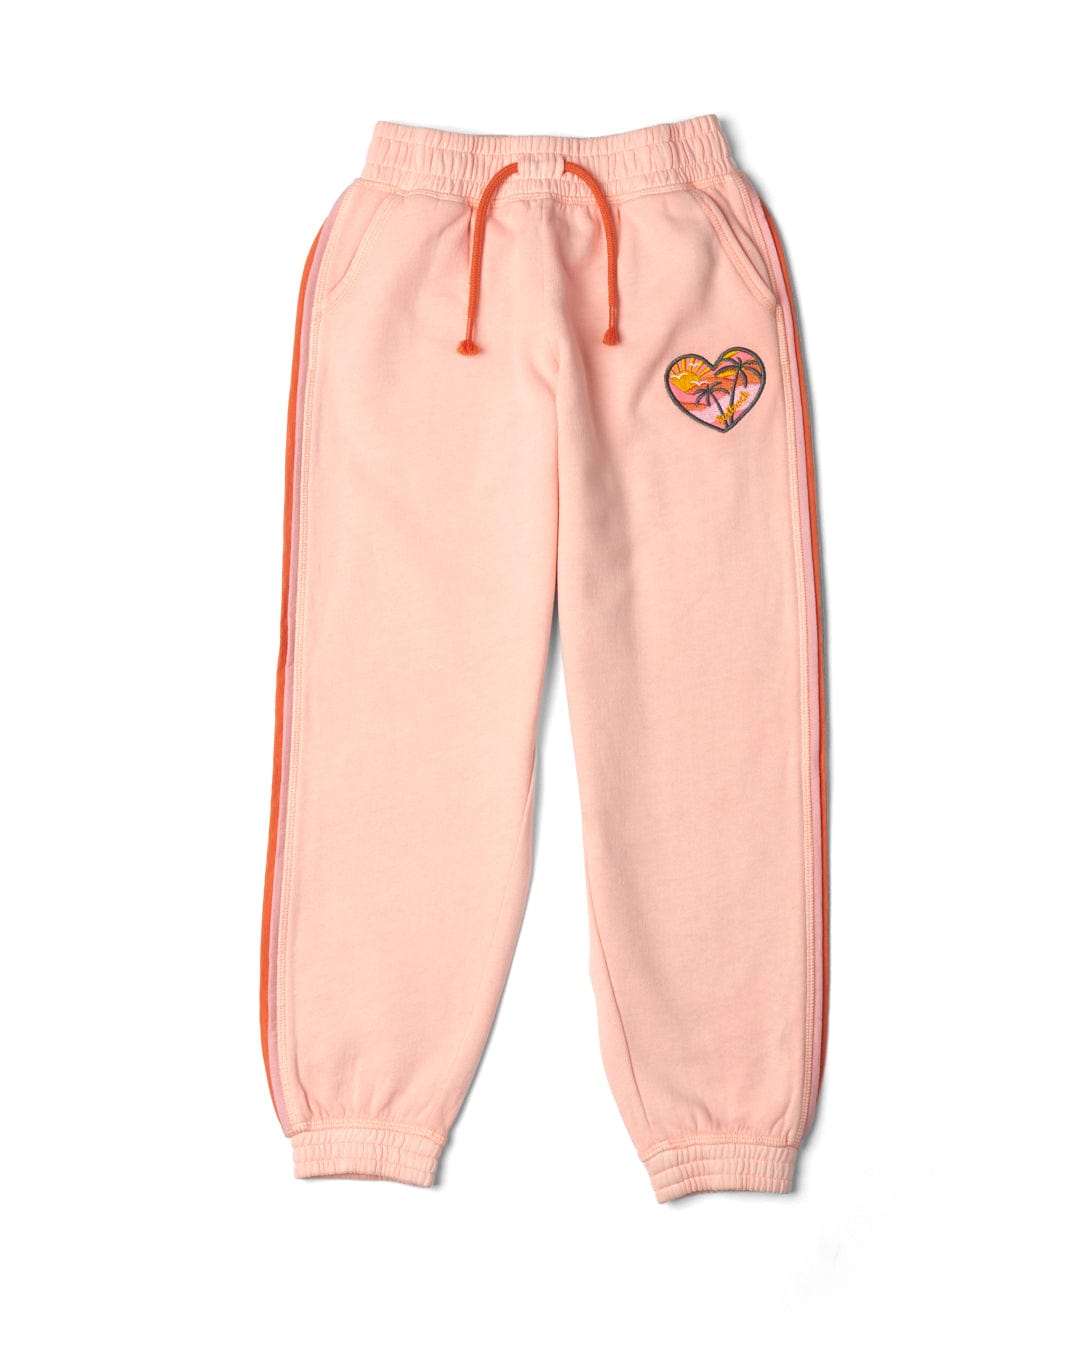 Saltrock's Sunshine State - Kids Joggers - Peach feature orange drawstrings, orange side stripes, and a heart graphic on the left thigh. With an elasticated waistband and elastic cuffs at the ankles, these 100% cotton joggers ensure a soft hand feel for ultimate comfort.